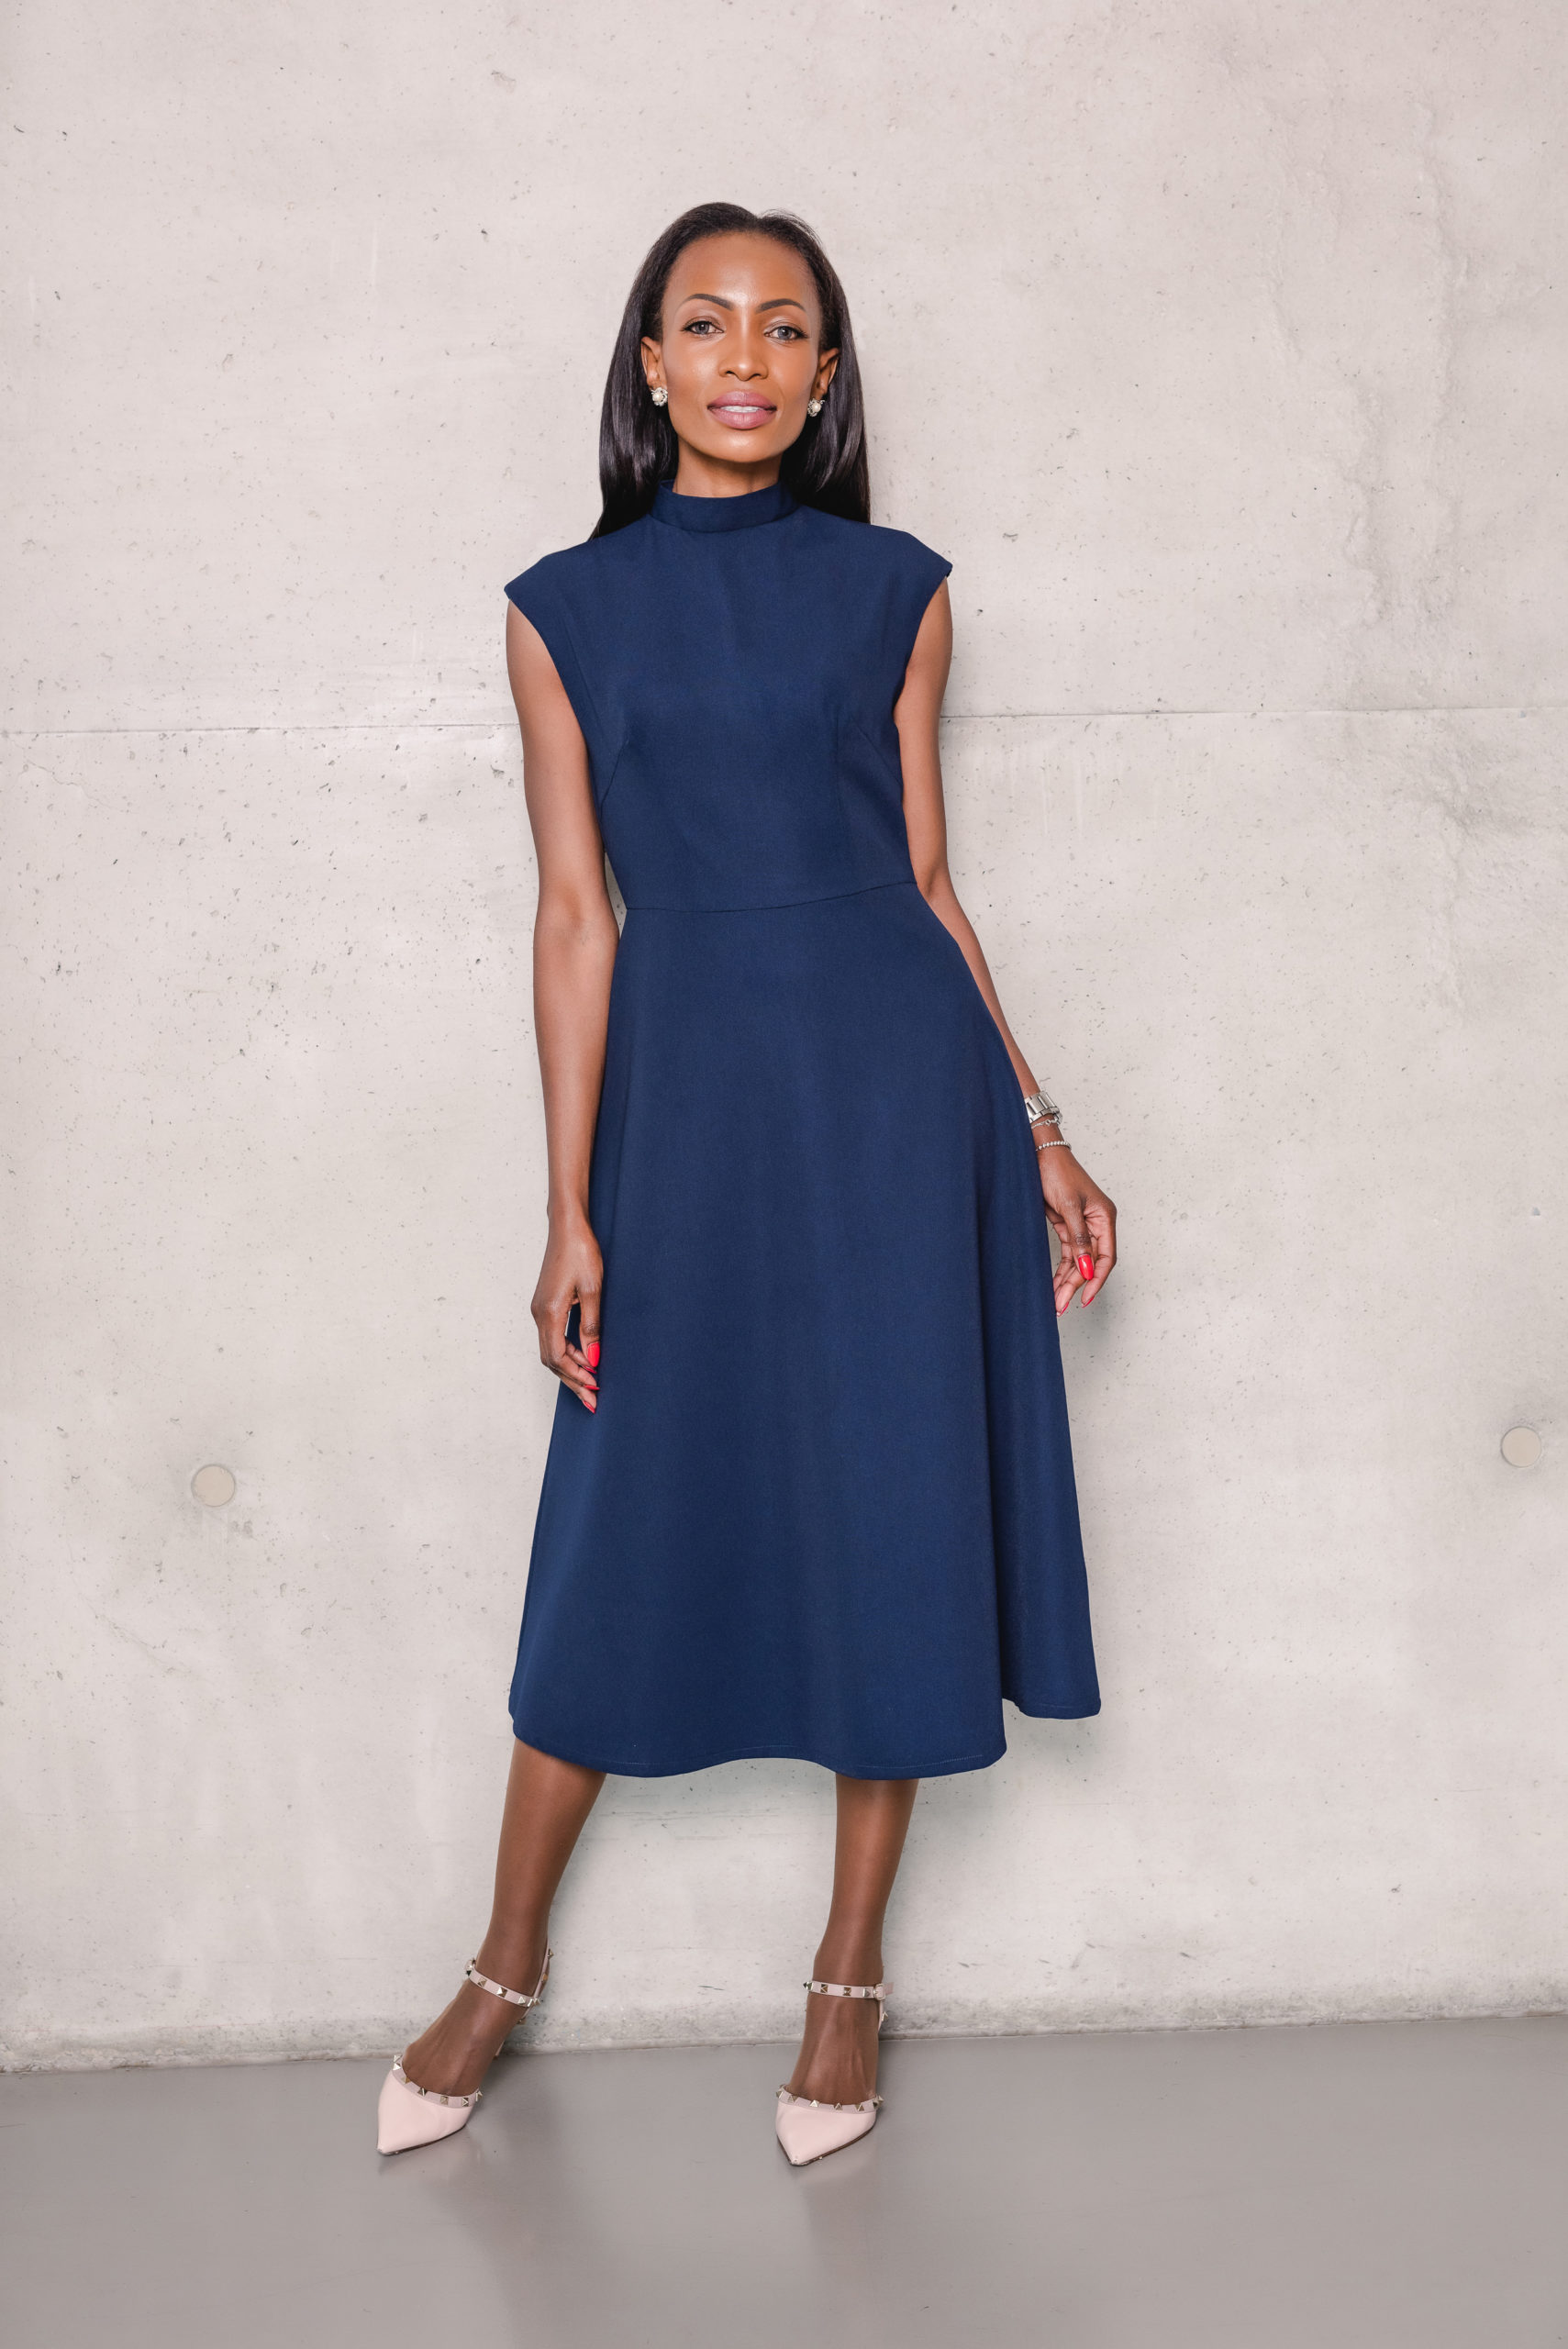 LUV4YOU Countryside Kleid in Navy